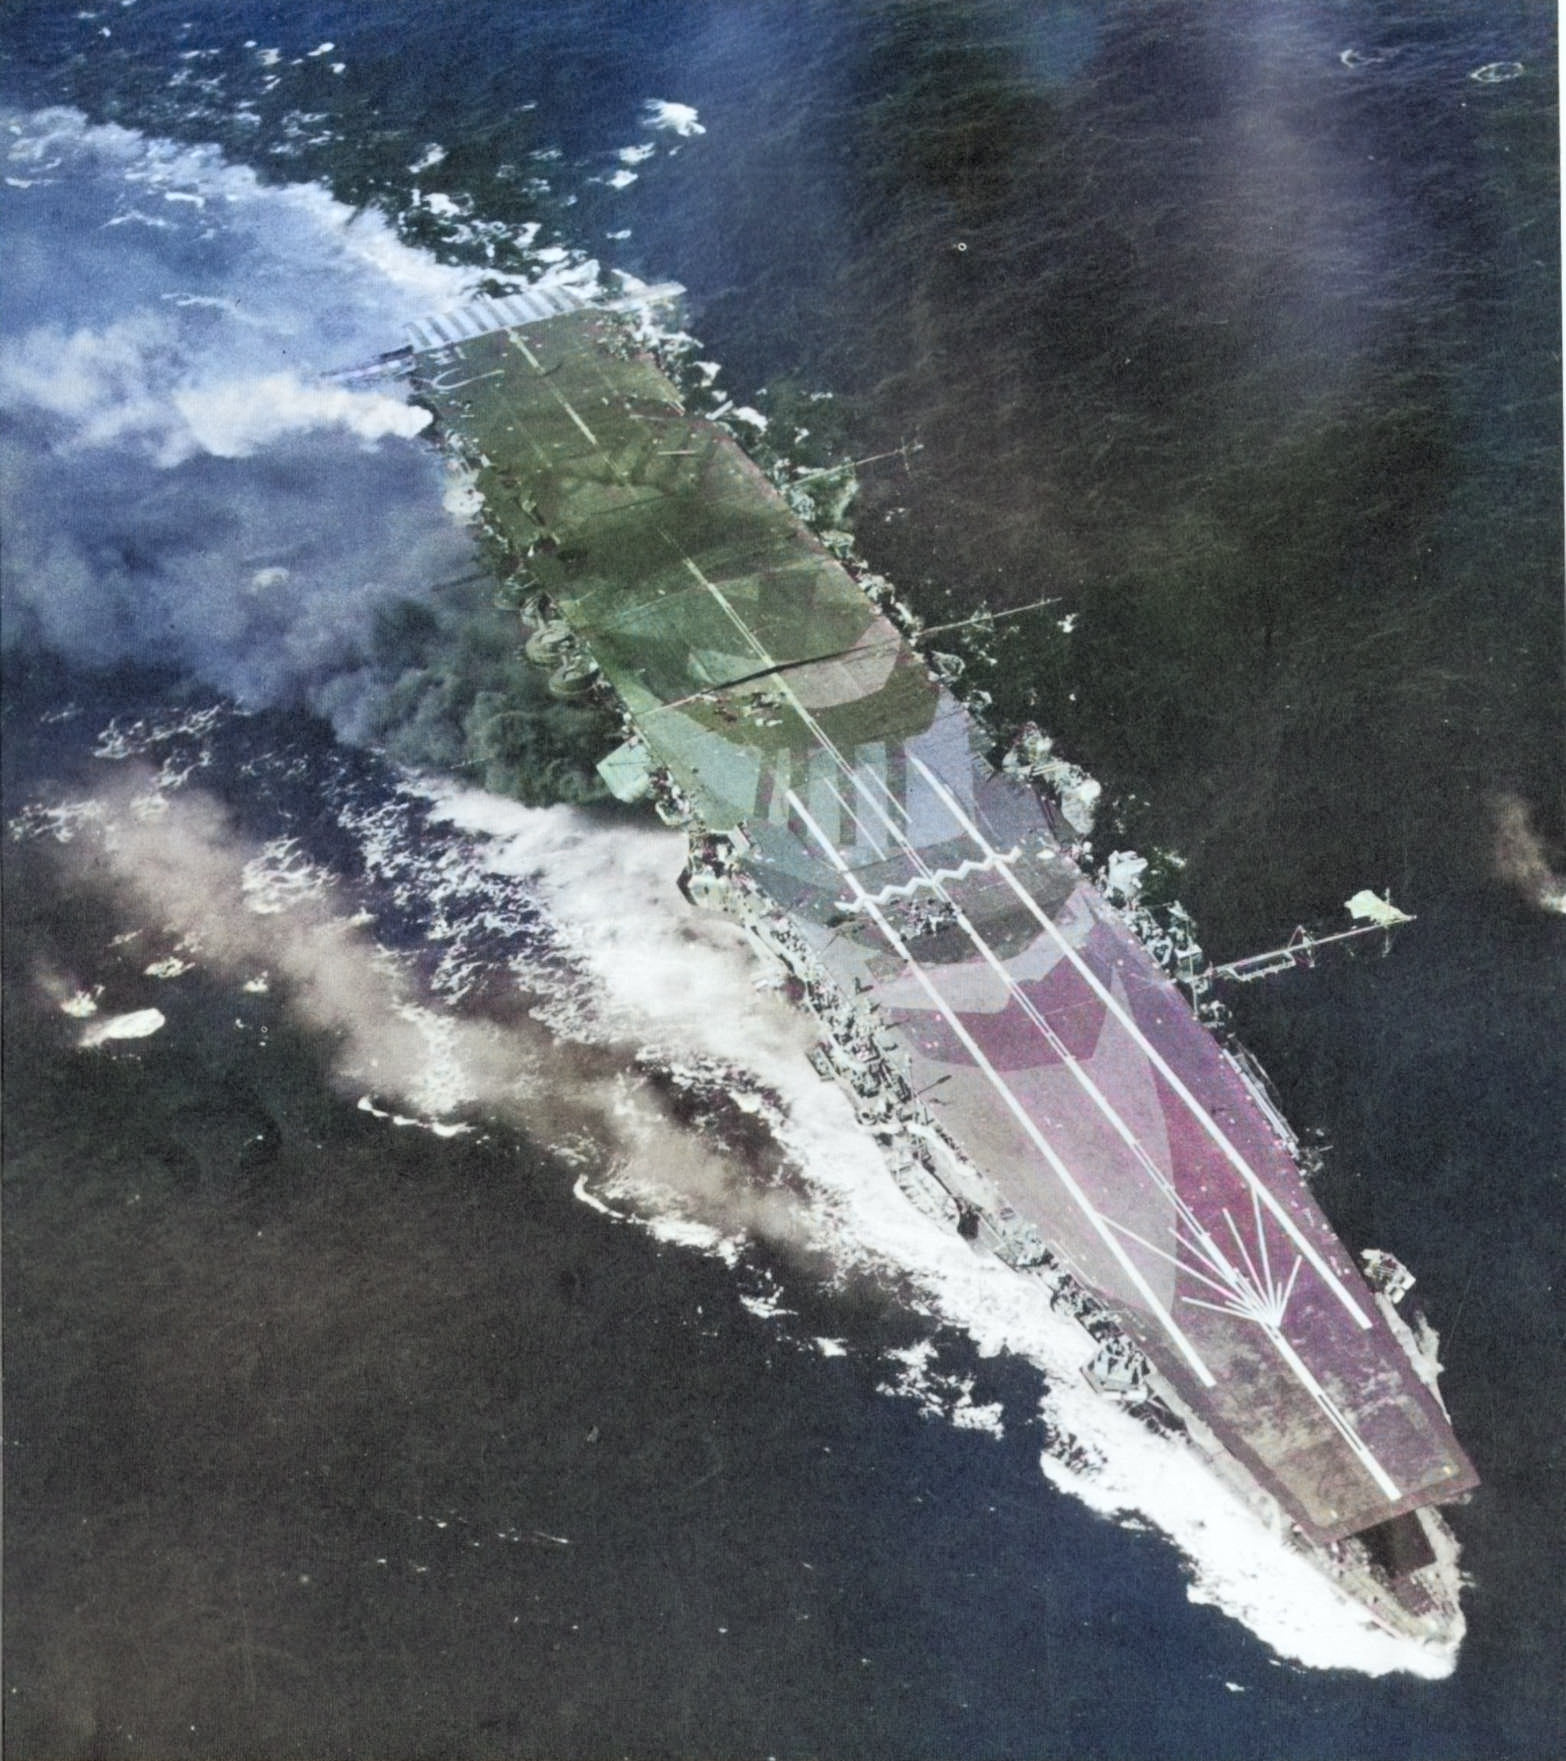 Carrier Zuiho damaged during Battle off Cape Engaño, 25 Oct 1944; note battleship camouflage; as seen on page 68 of US Navy War Photographs [Colorized by WW2DB]